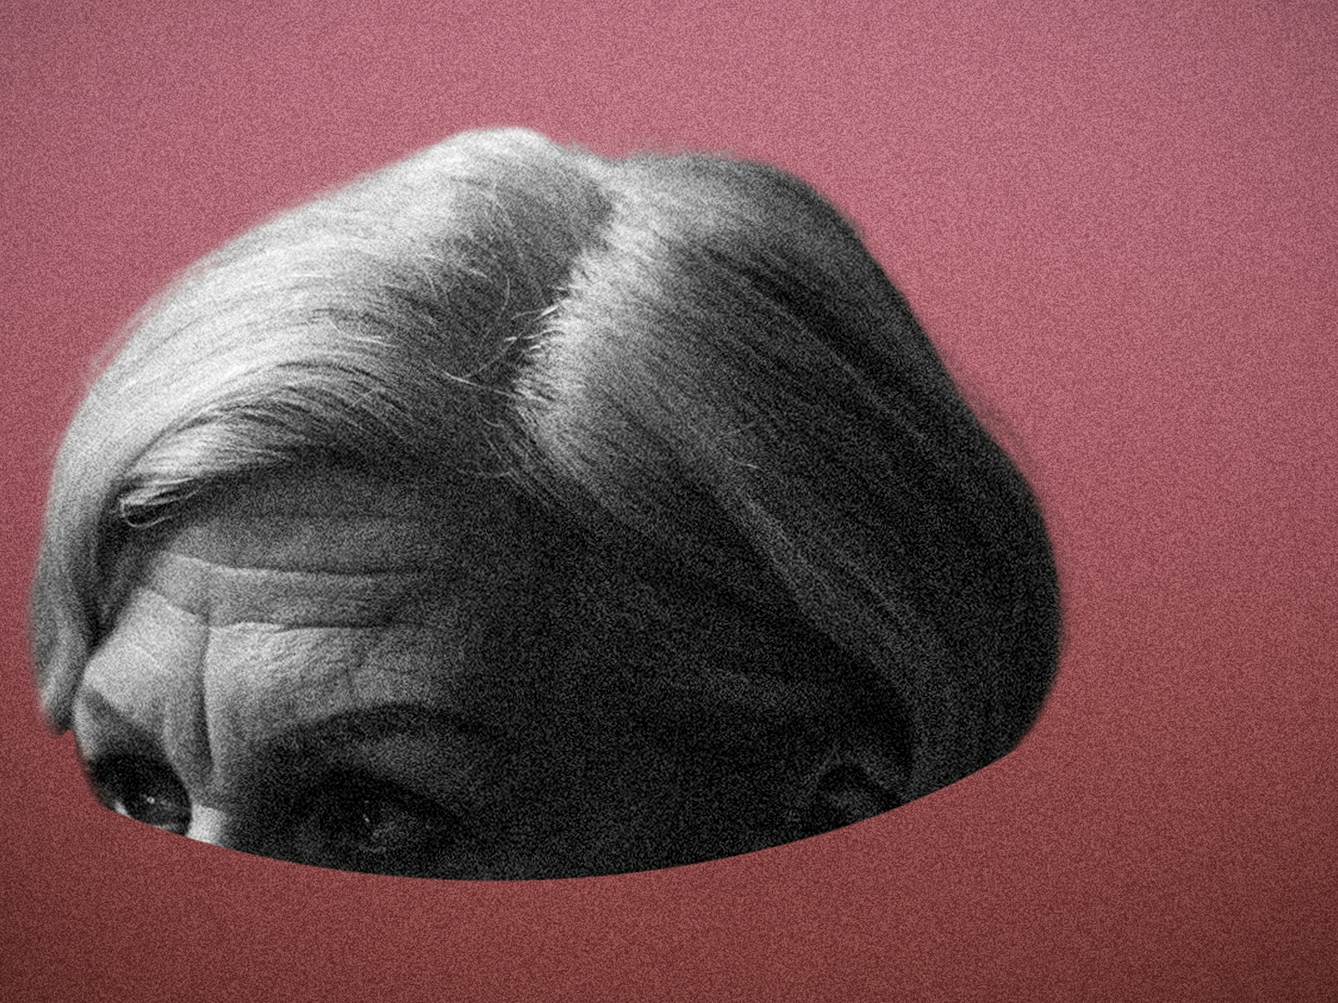 Detail from a larger digital collage artwork made up of red and black and white hues. At the centre is the floating upper half of an older woman's head, cut off just below her eyes. The background is a graduated textured tone from dark red at the bottom to lighter red at the top.